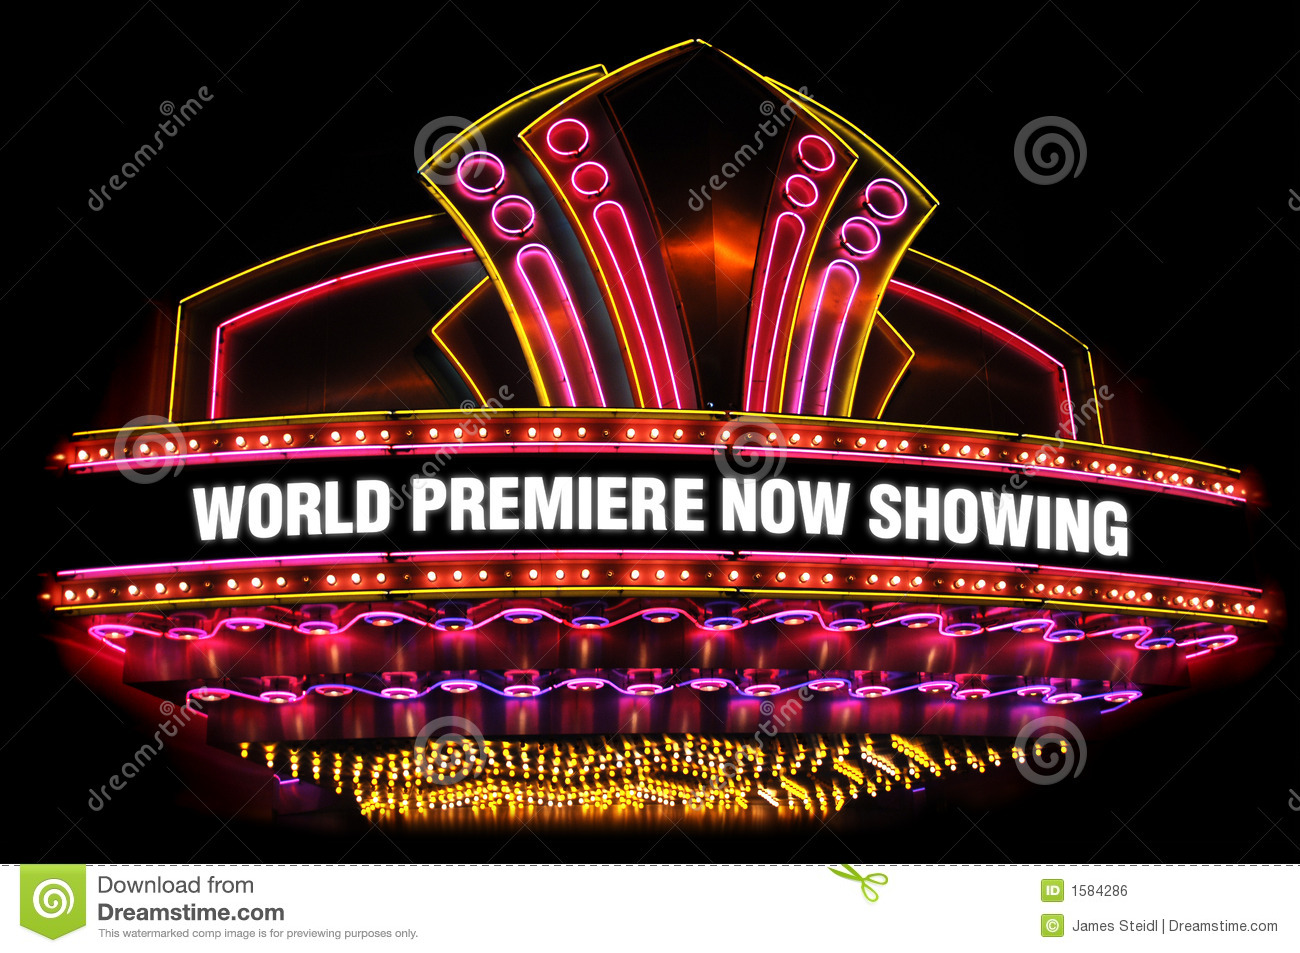 Movie Theatre Marquee Royalty Free Stock Image   Image  1584286